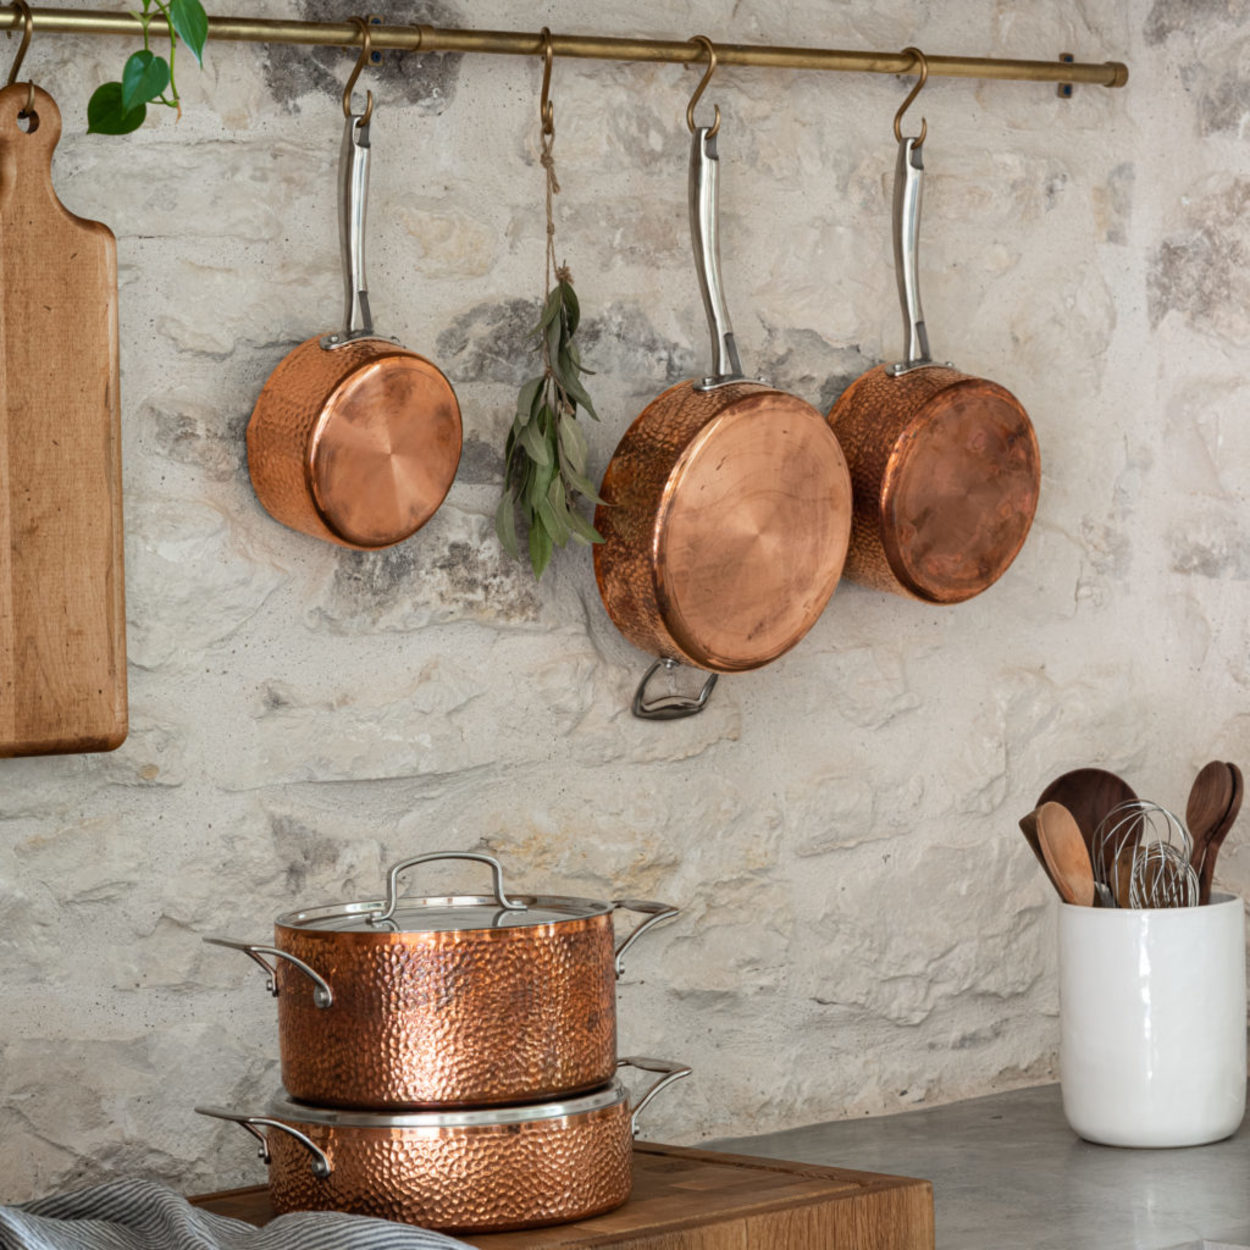 Introducing Our Kitchen Collection Blog - Magnolia